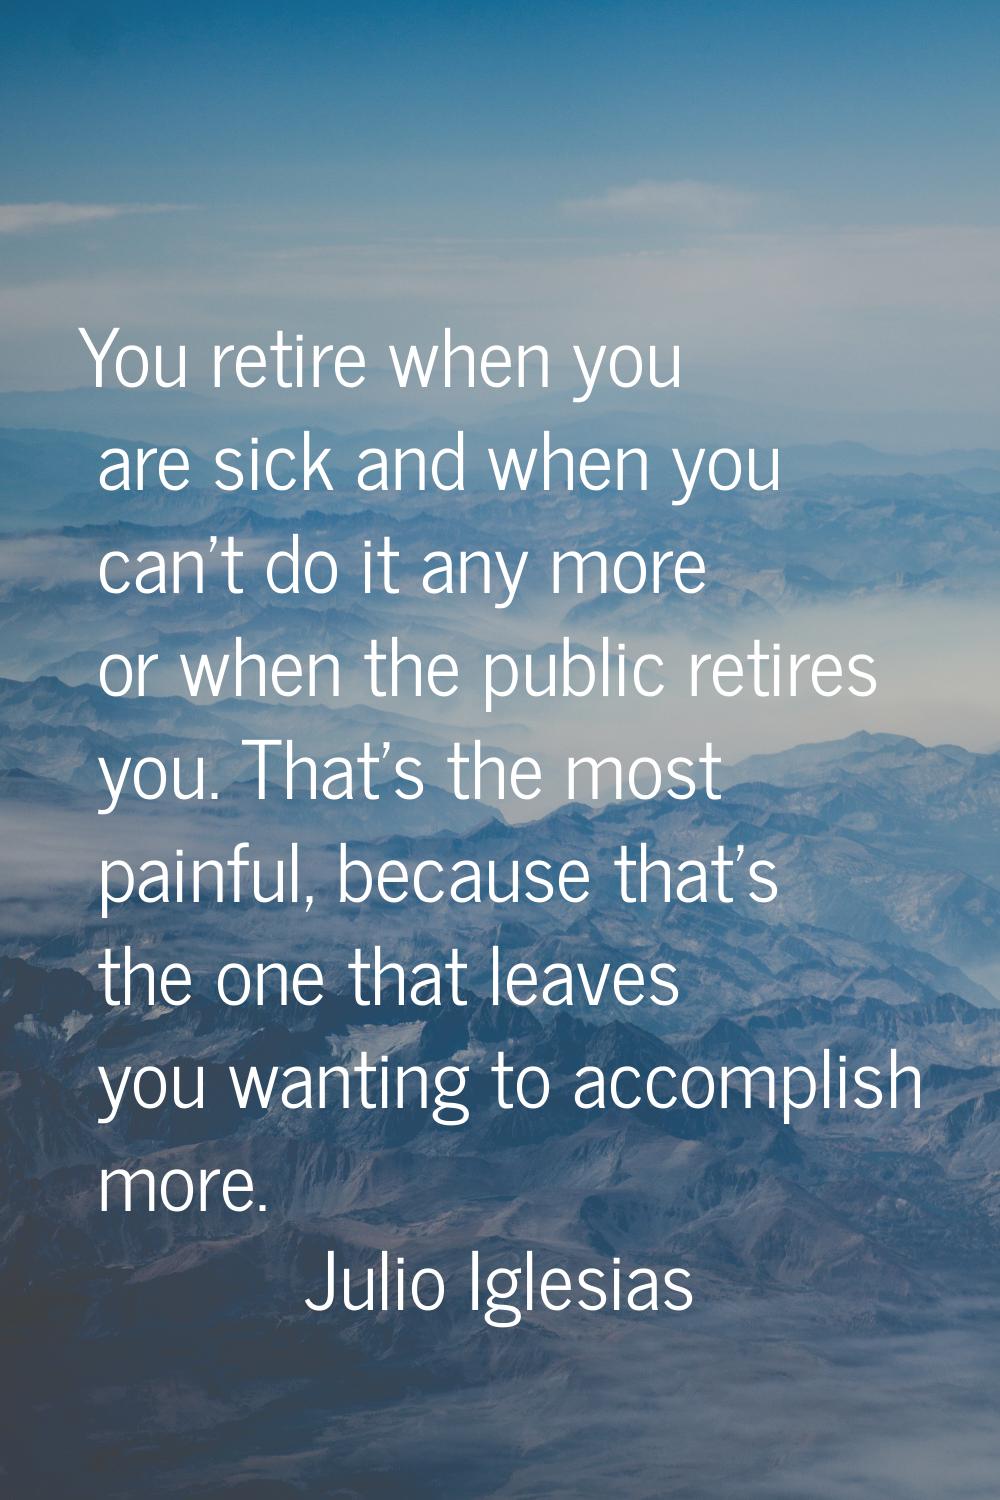 You retire when you are sick and when you can't do it any more or when the public retires you. That